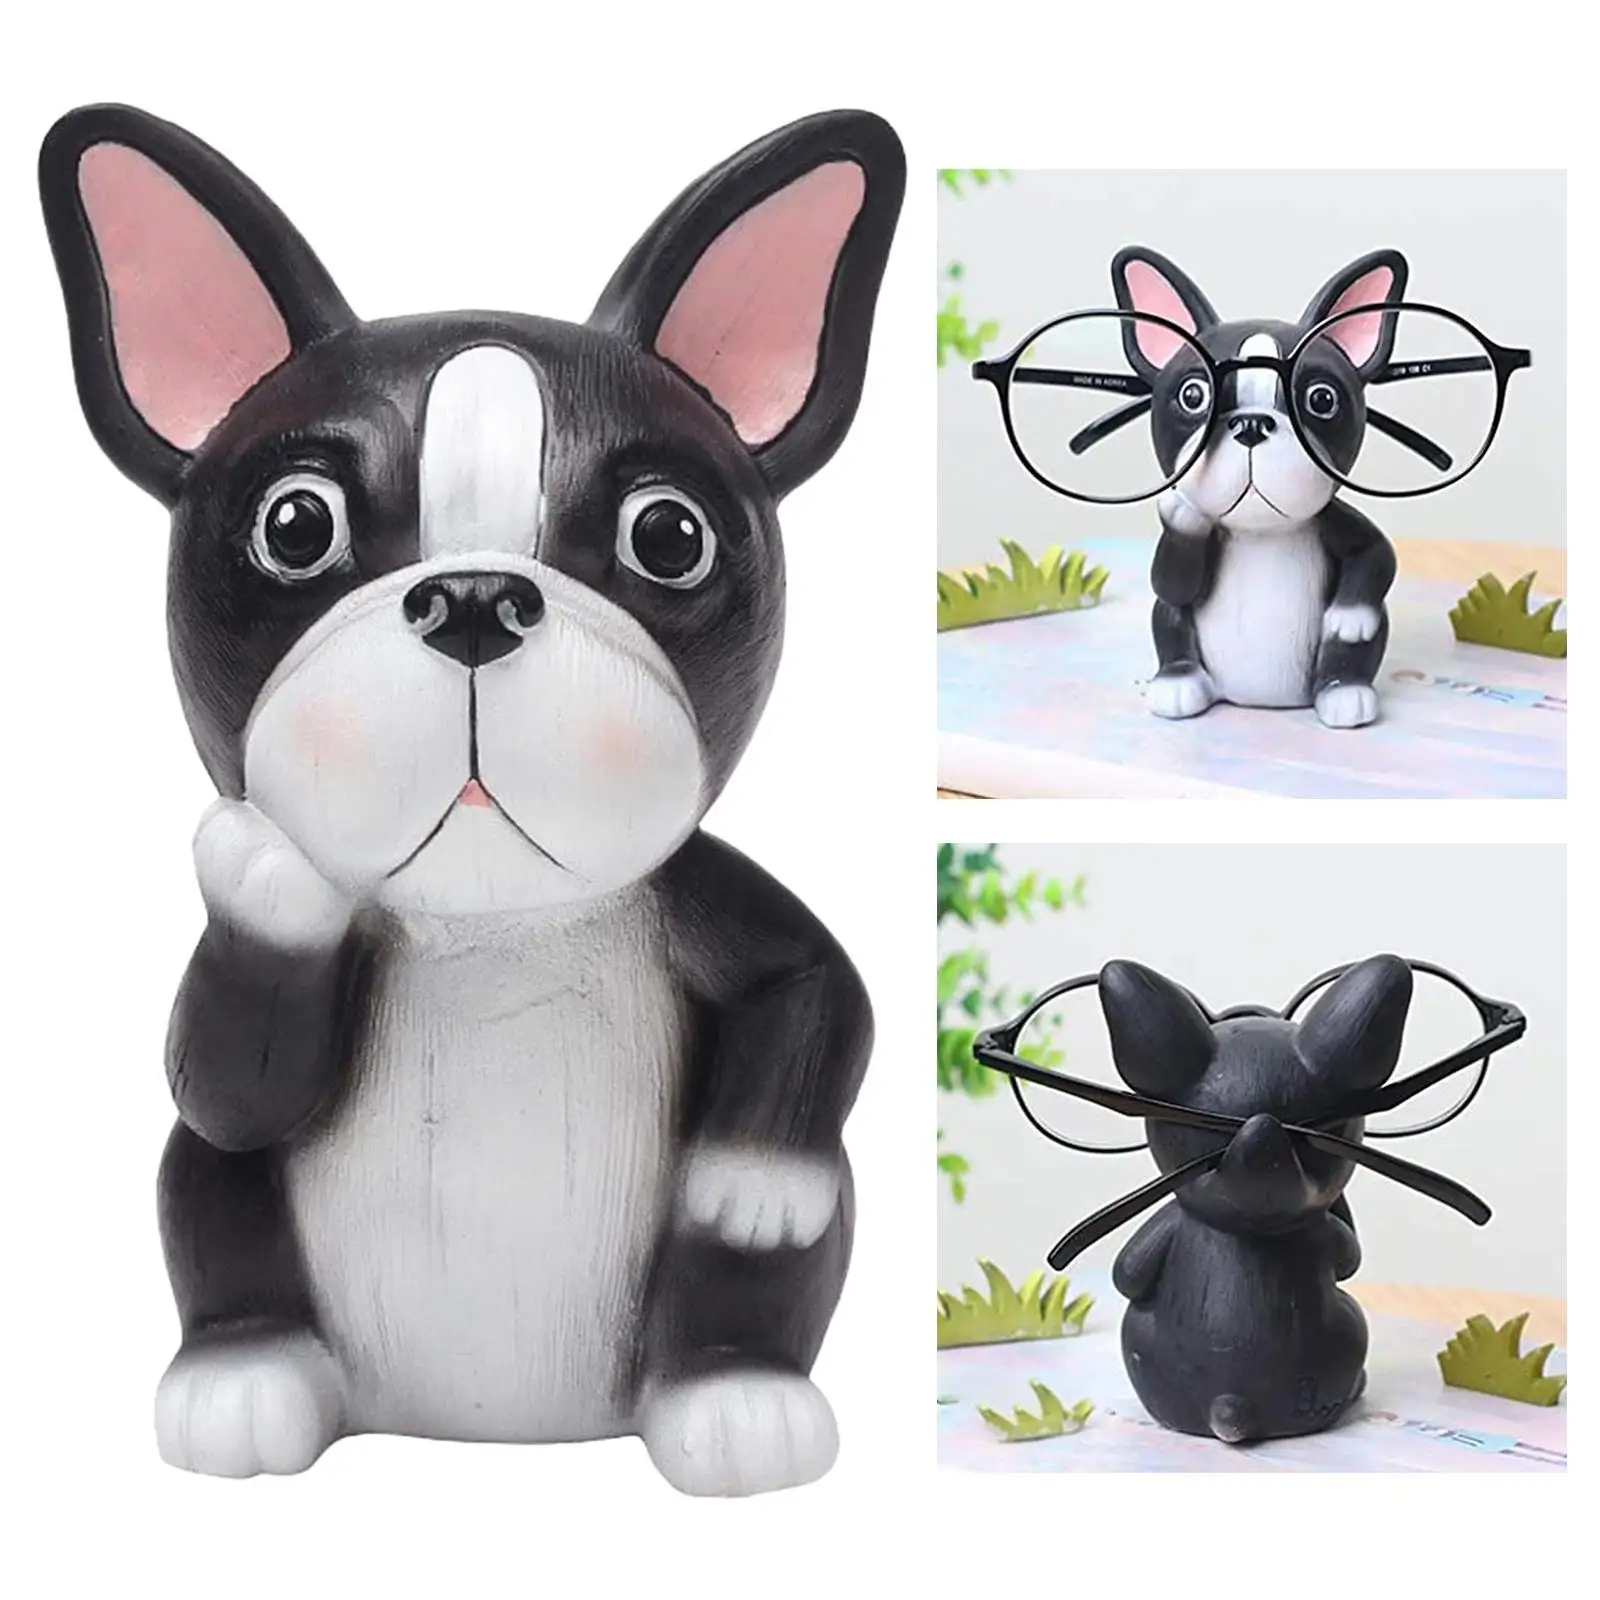 Resin Animal Eyeglasses Holder Stand Rack Spectacle Display Desktop Study Ornaments , Gifts for Birthday Baby Showers Souvenir